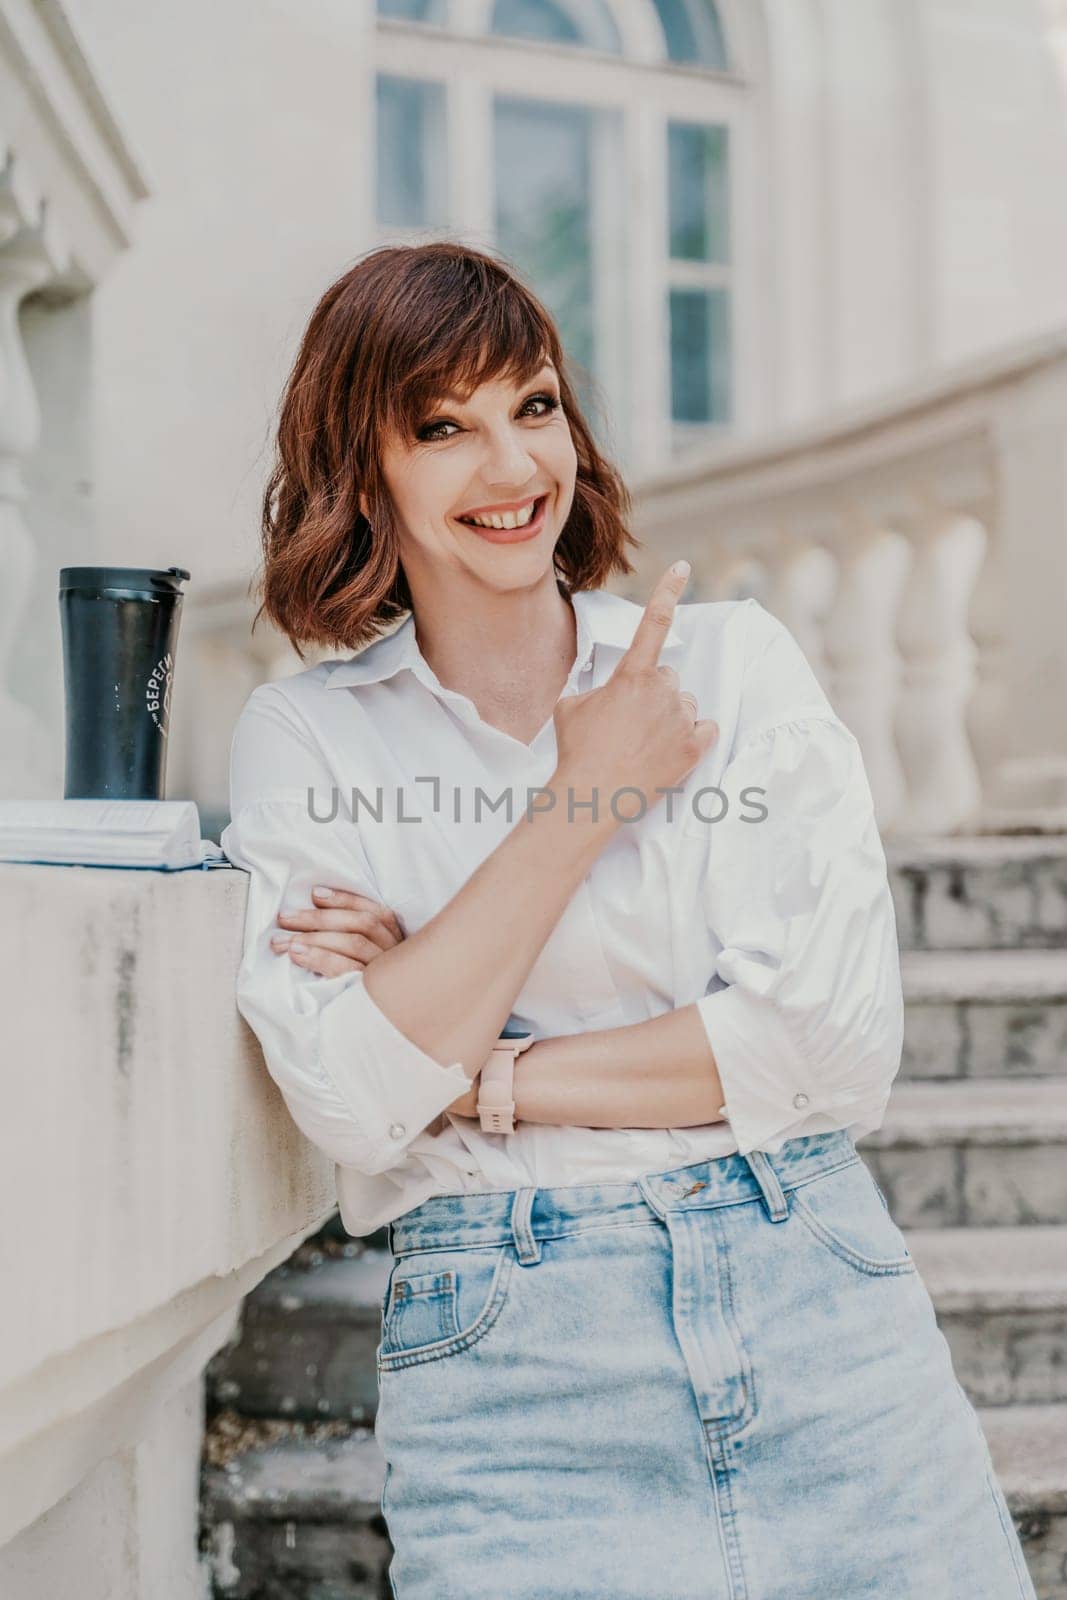 Woman building city. A business woman in a white shirt and denim skirt stands leaning against the wall on the steps of an ancient building in the city.